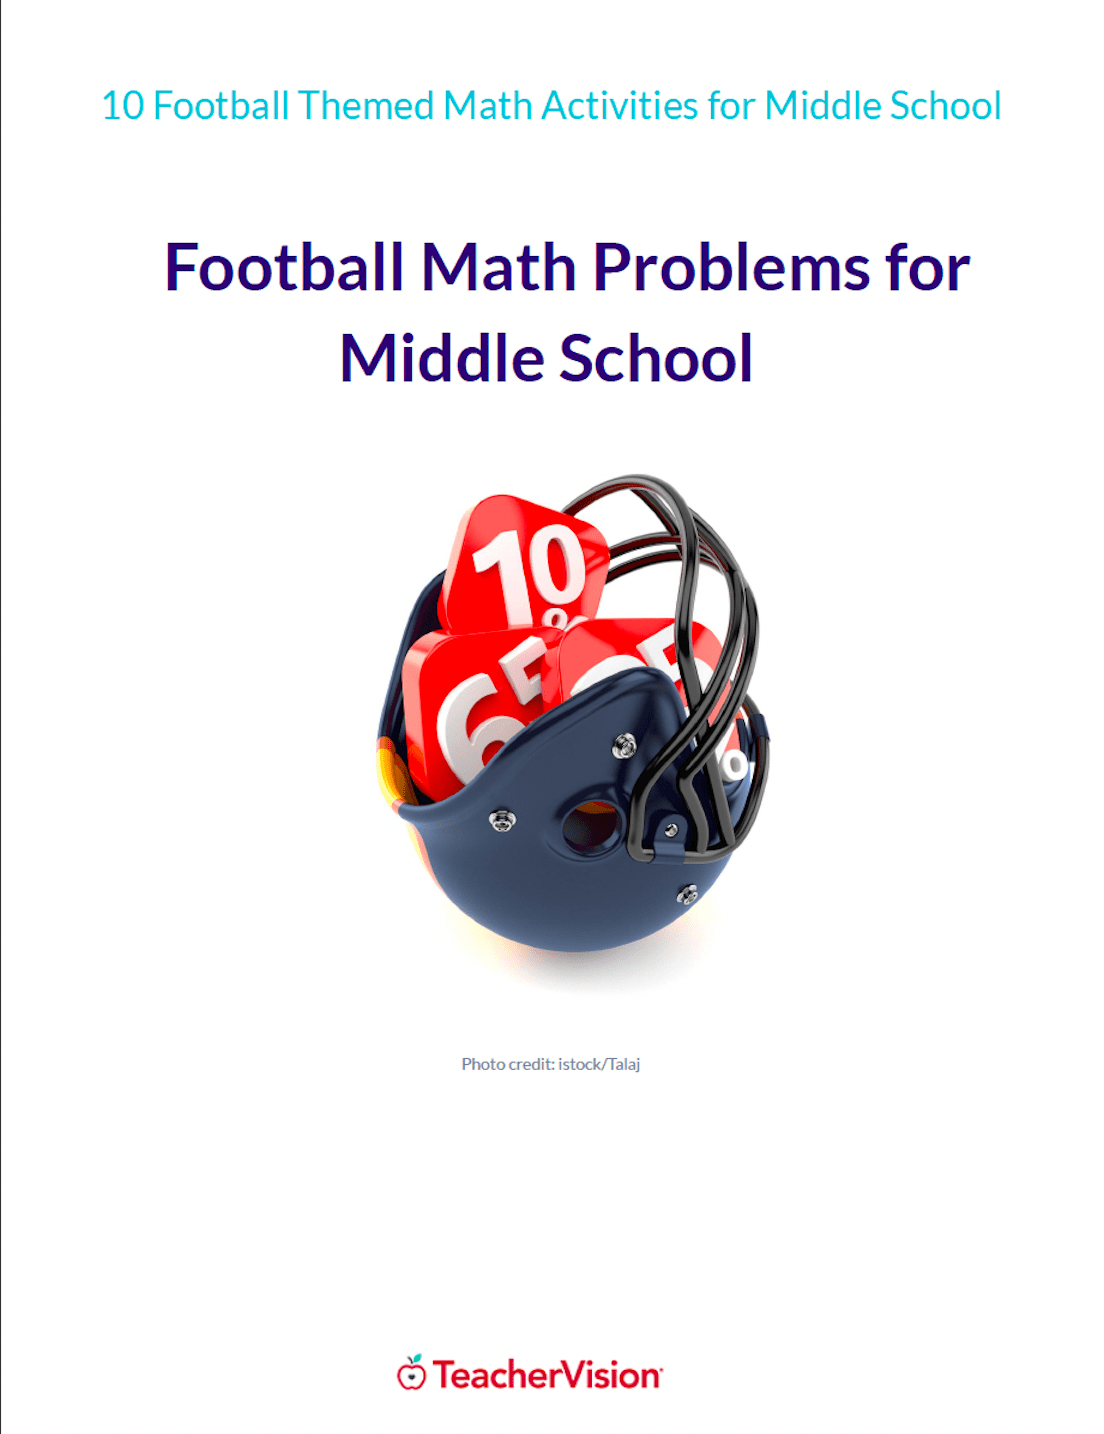 Football Math Problems for Middle School